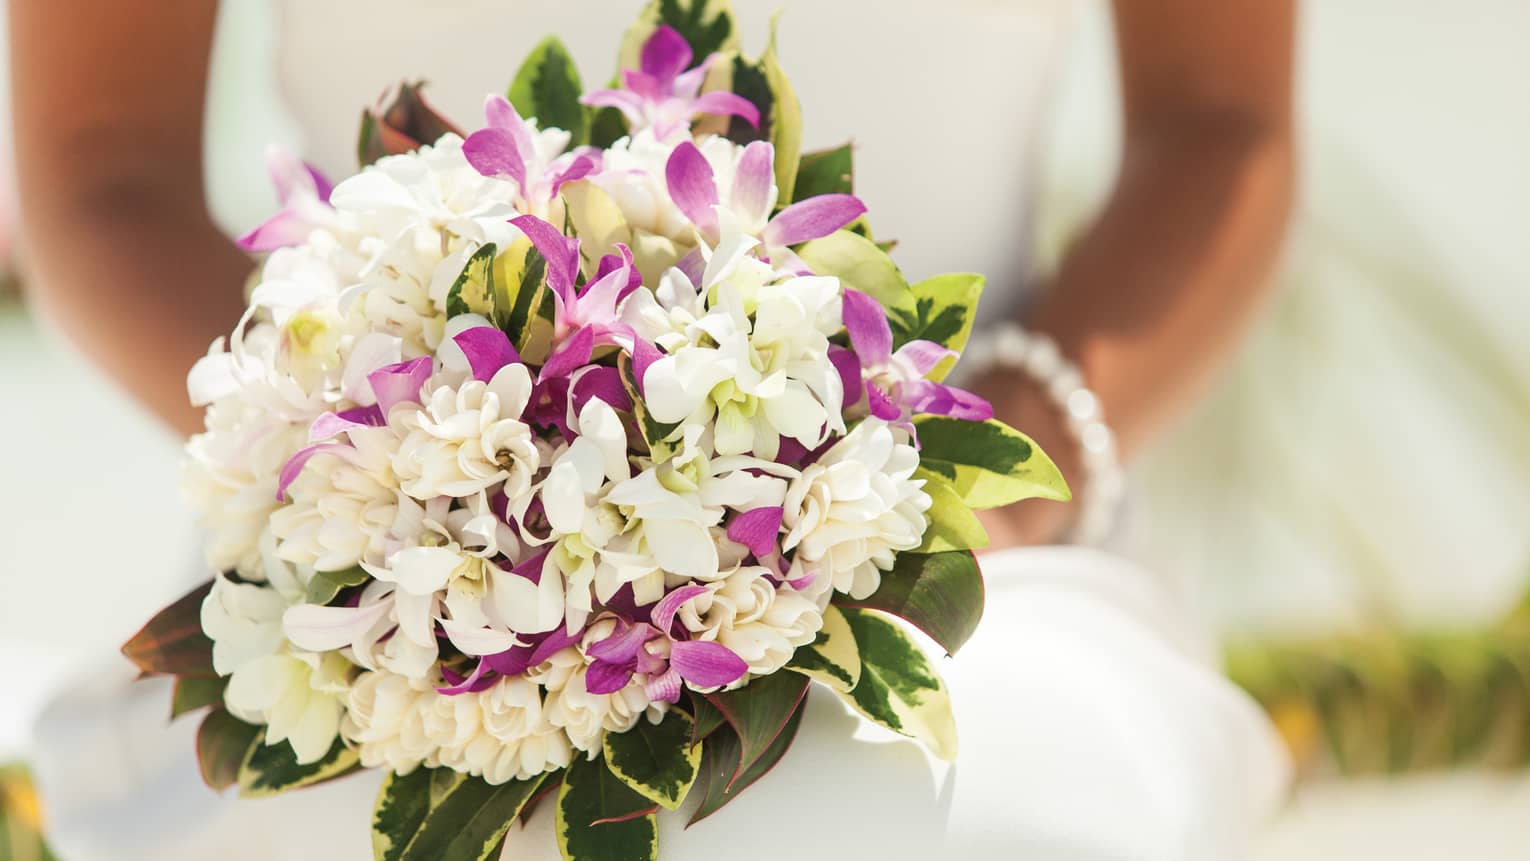 Close-up of bride holding wedding bouquet with purple and white flowers